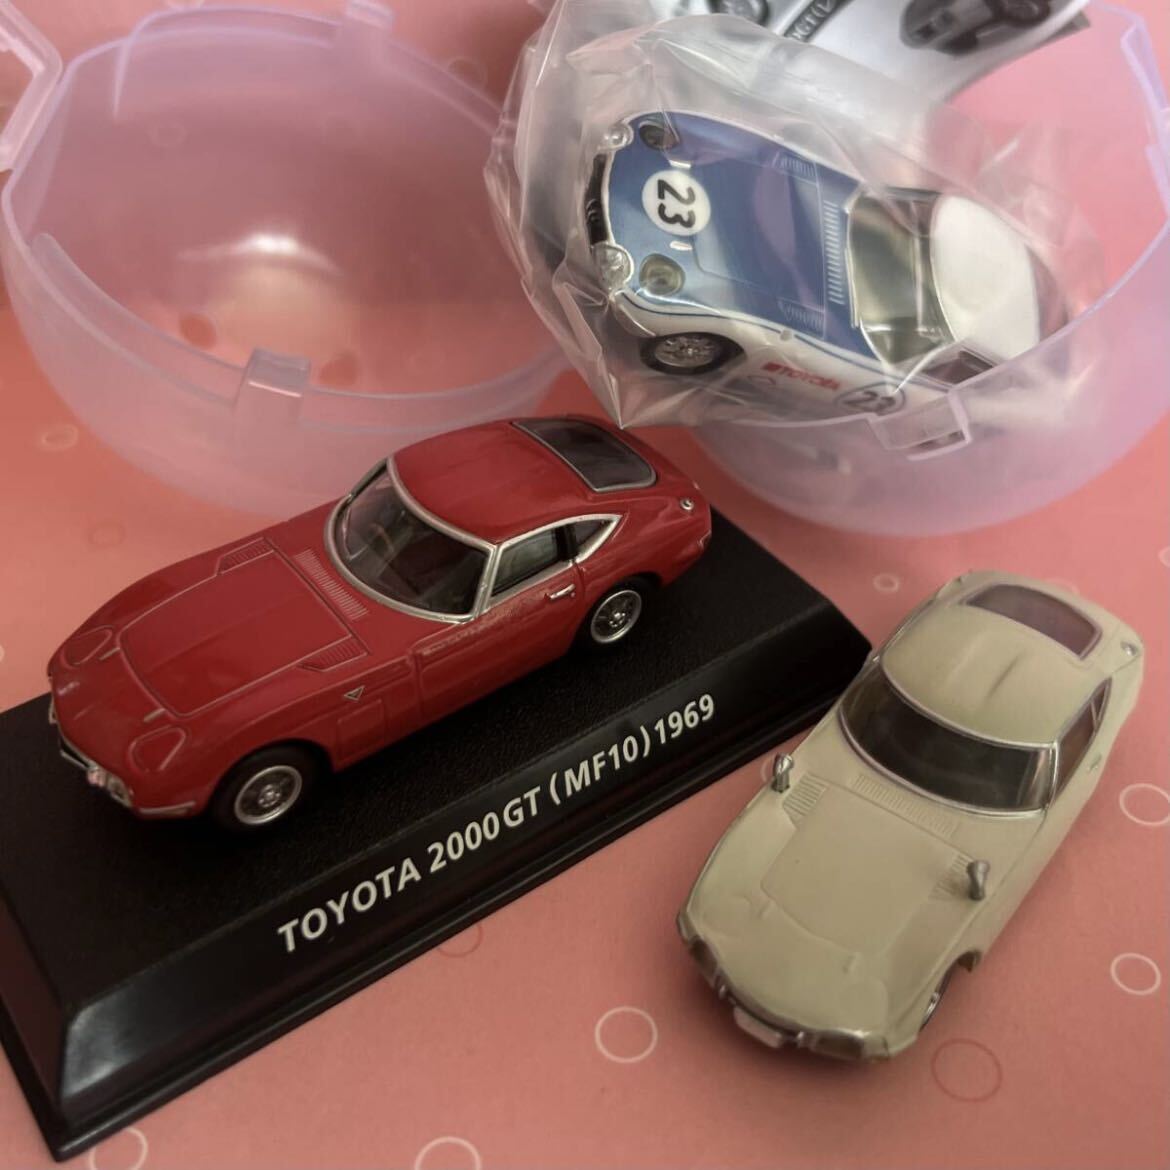 * out of print famous car collection &ga tea & time slip Glyco Toyota 2000GT (MF10) 3 pcs set[.. prompt decision price ] postage included 